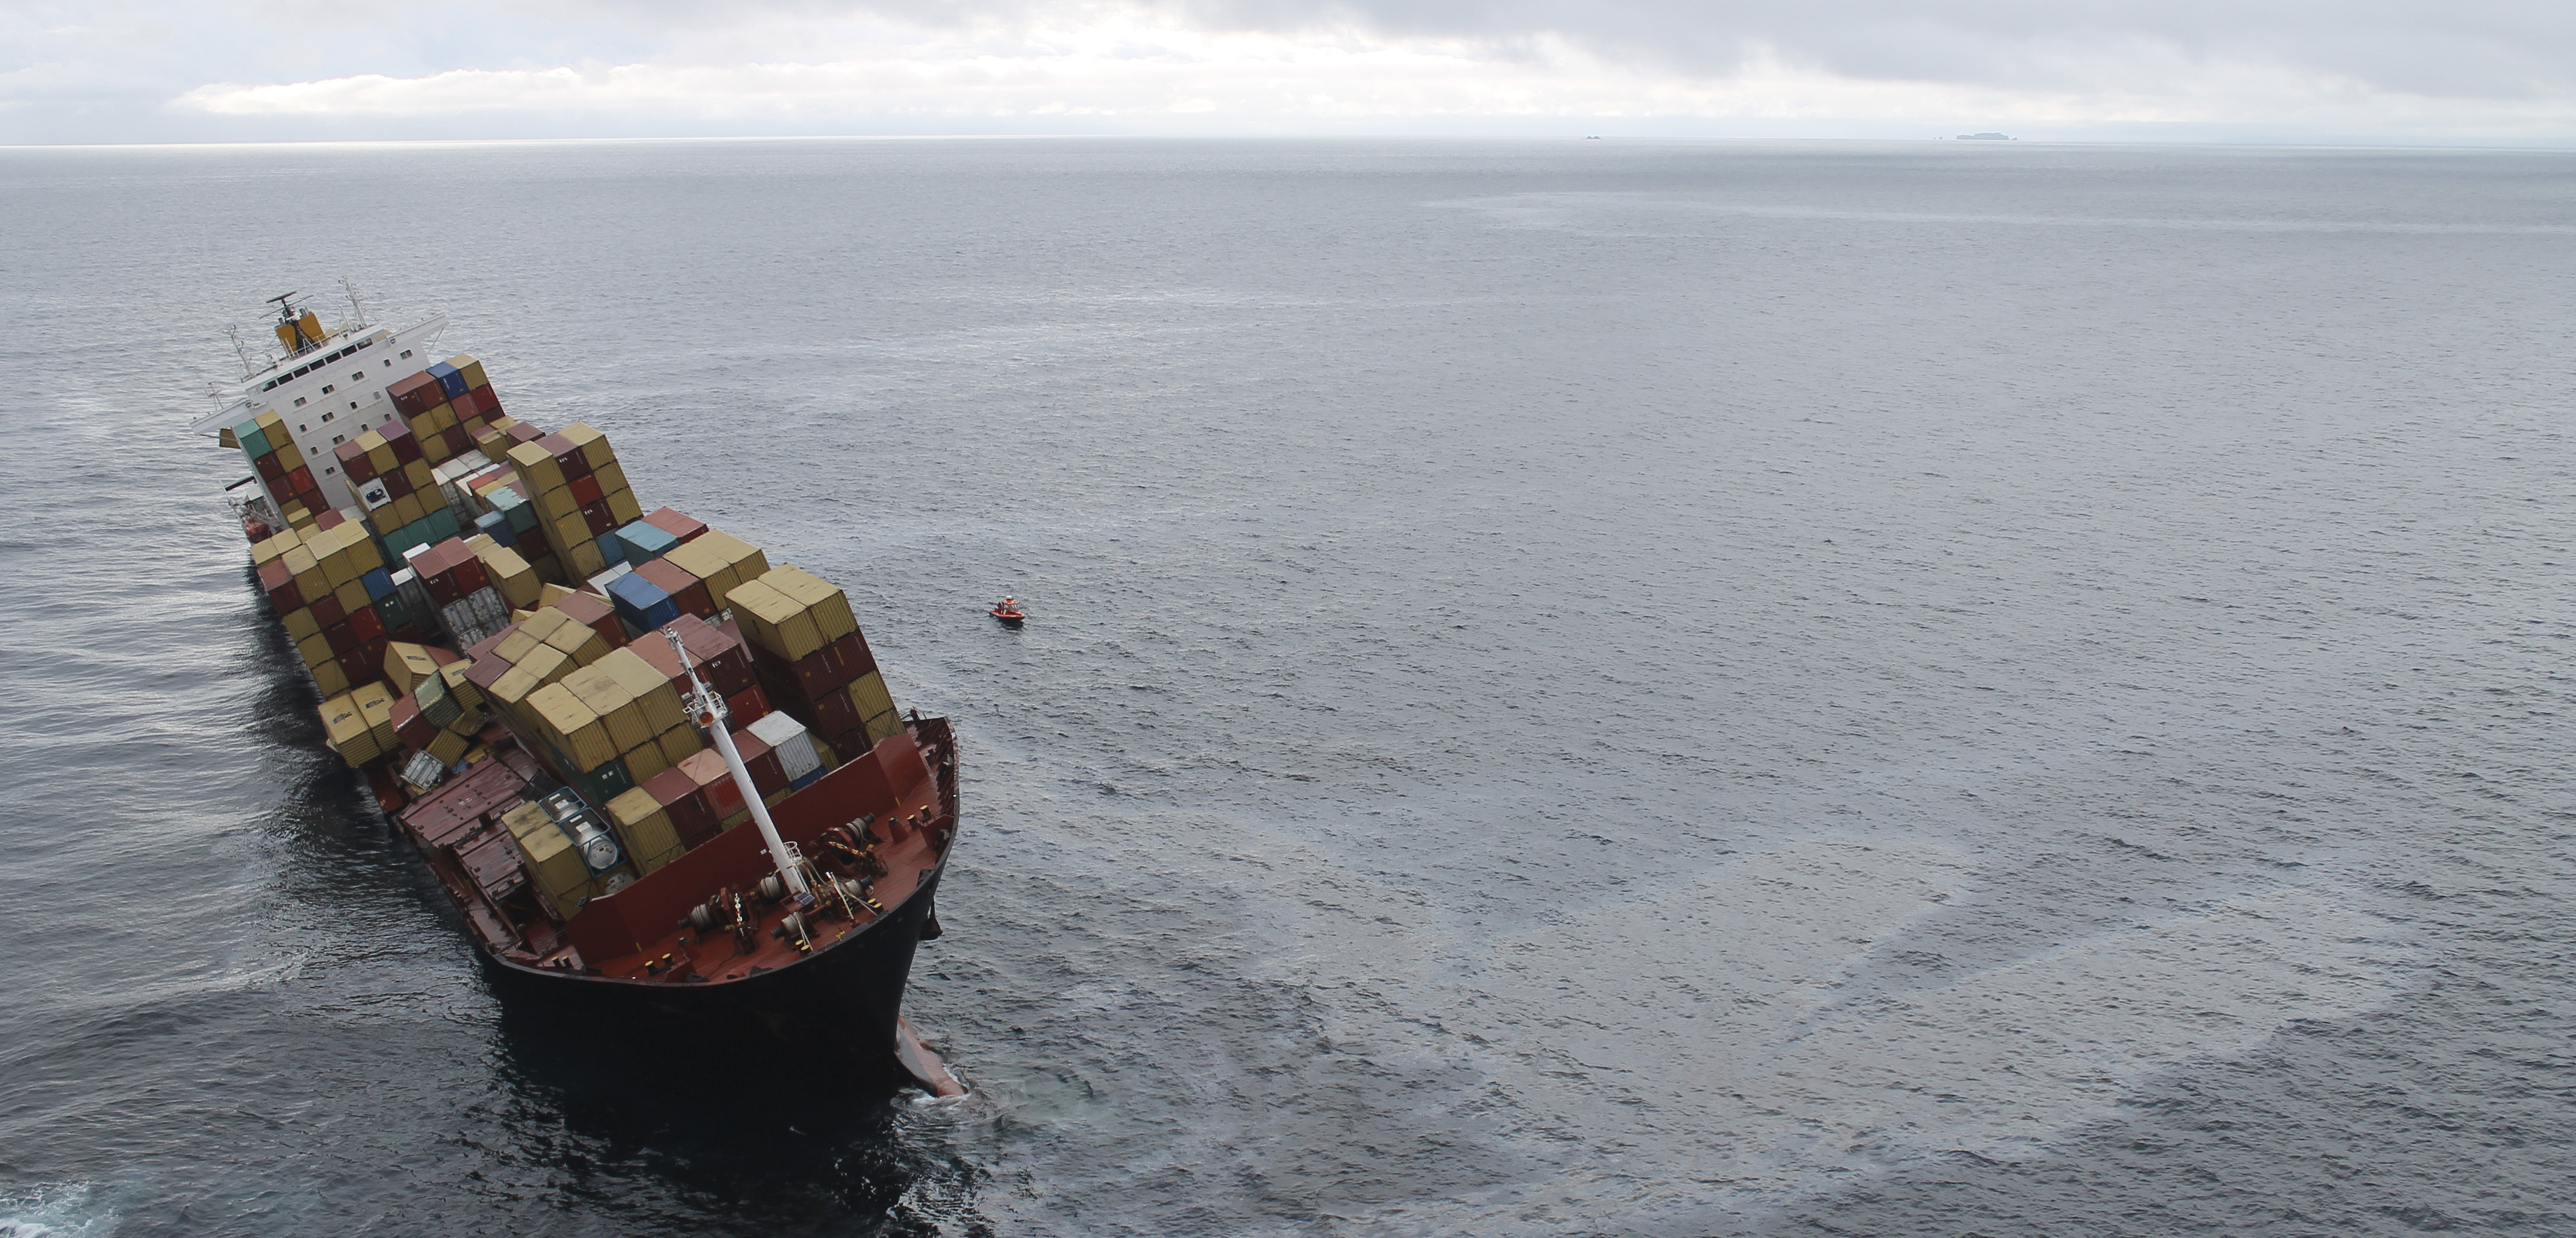 The container ship Rena spilled 350 tonnes of oil into the water off New Zealand after it ran aground on the Astrolabe reef in 2011. Photo by HO/Reuters/Corbis